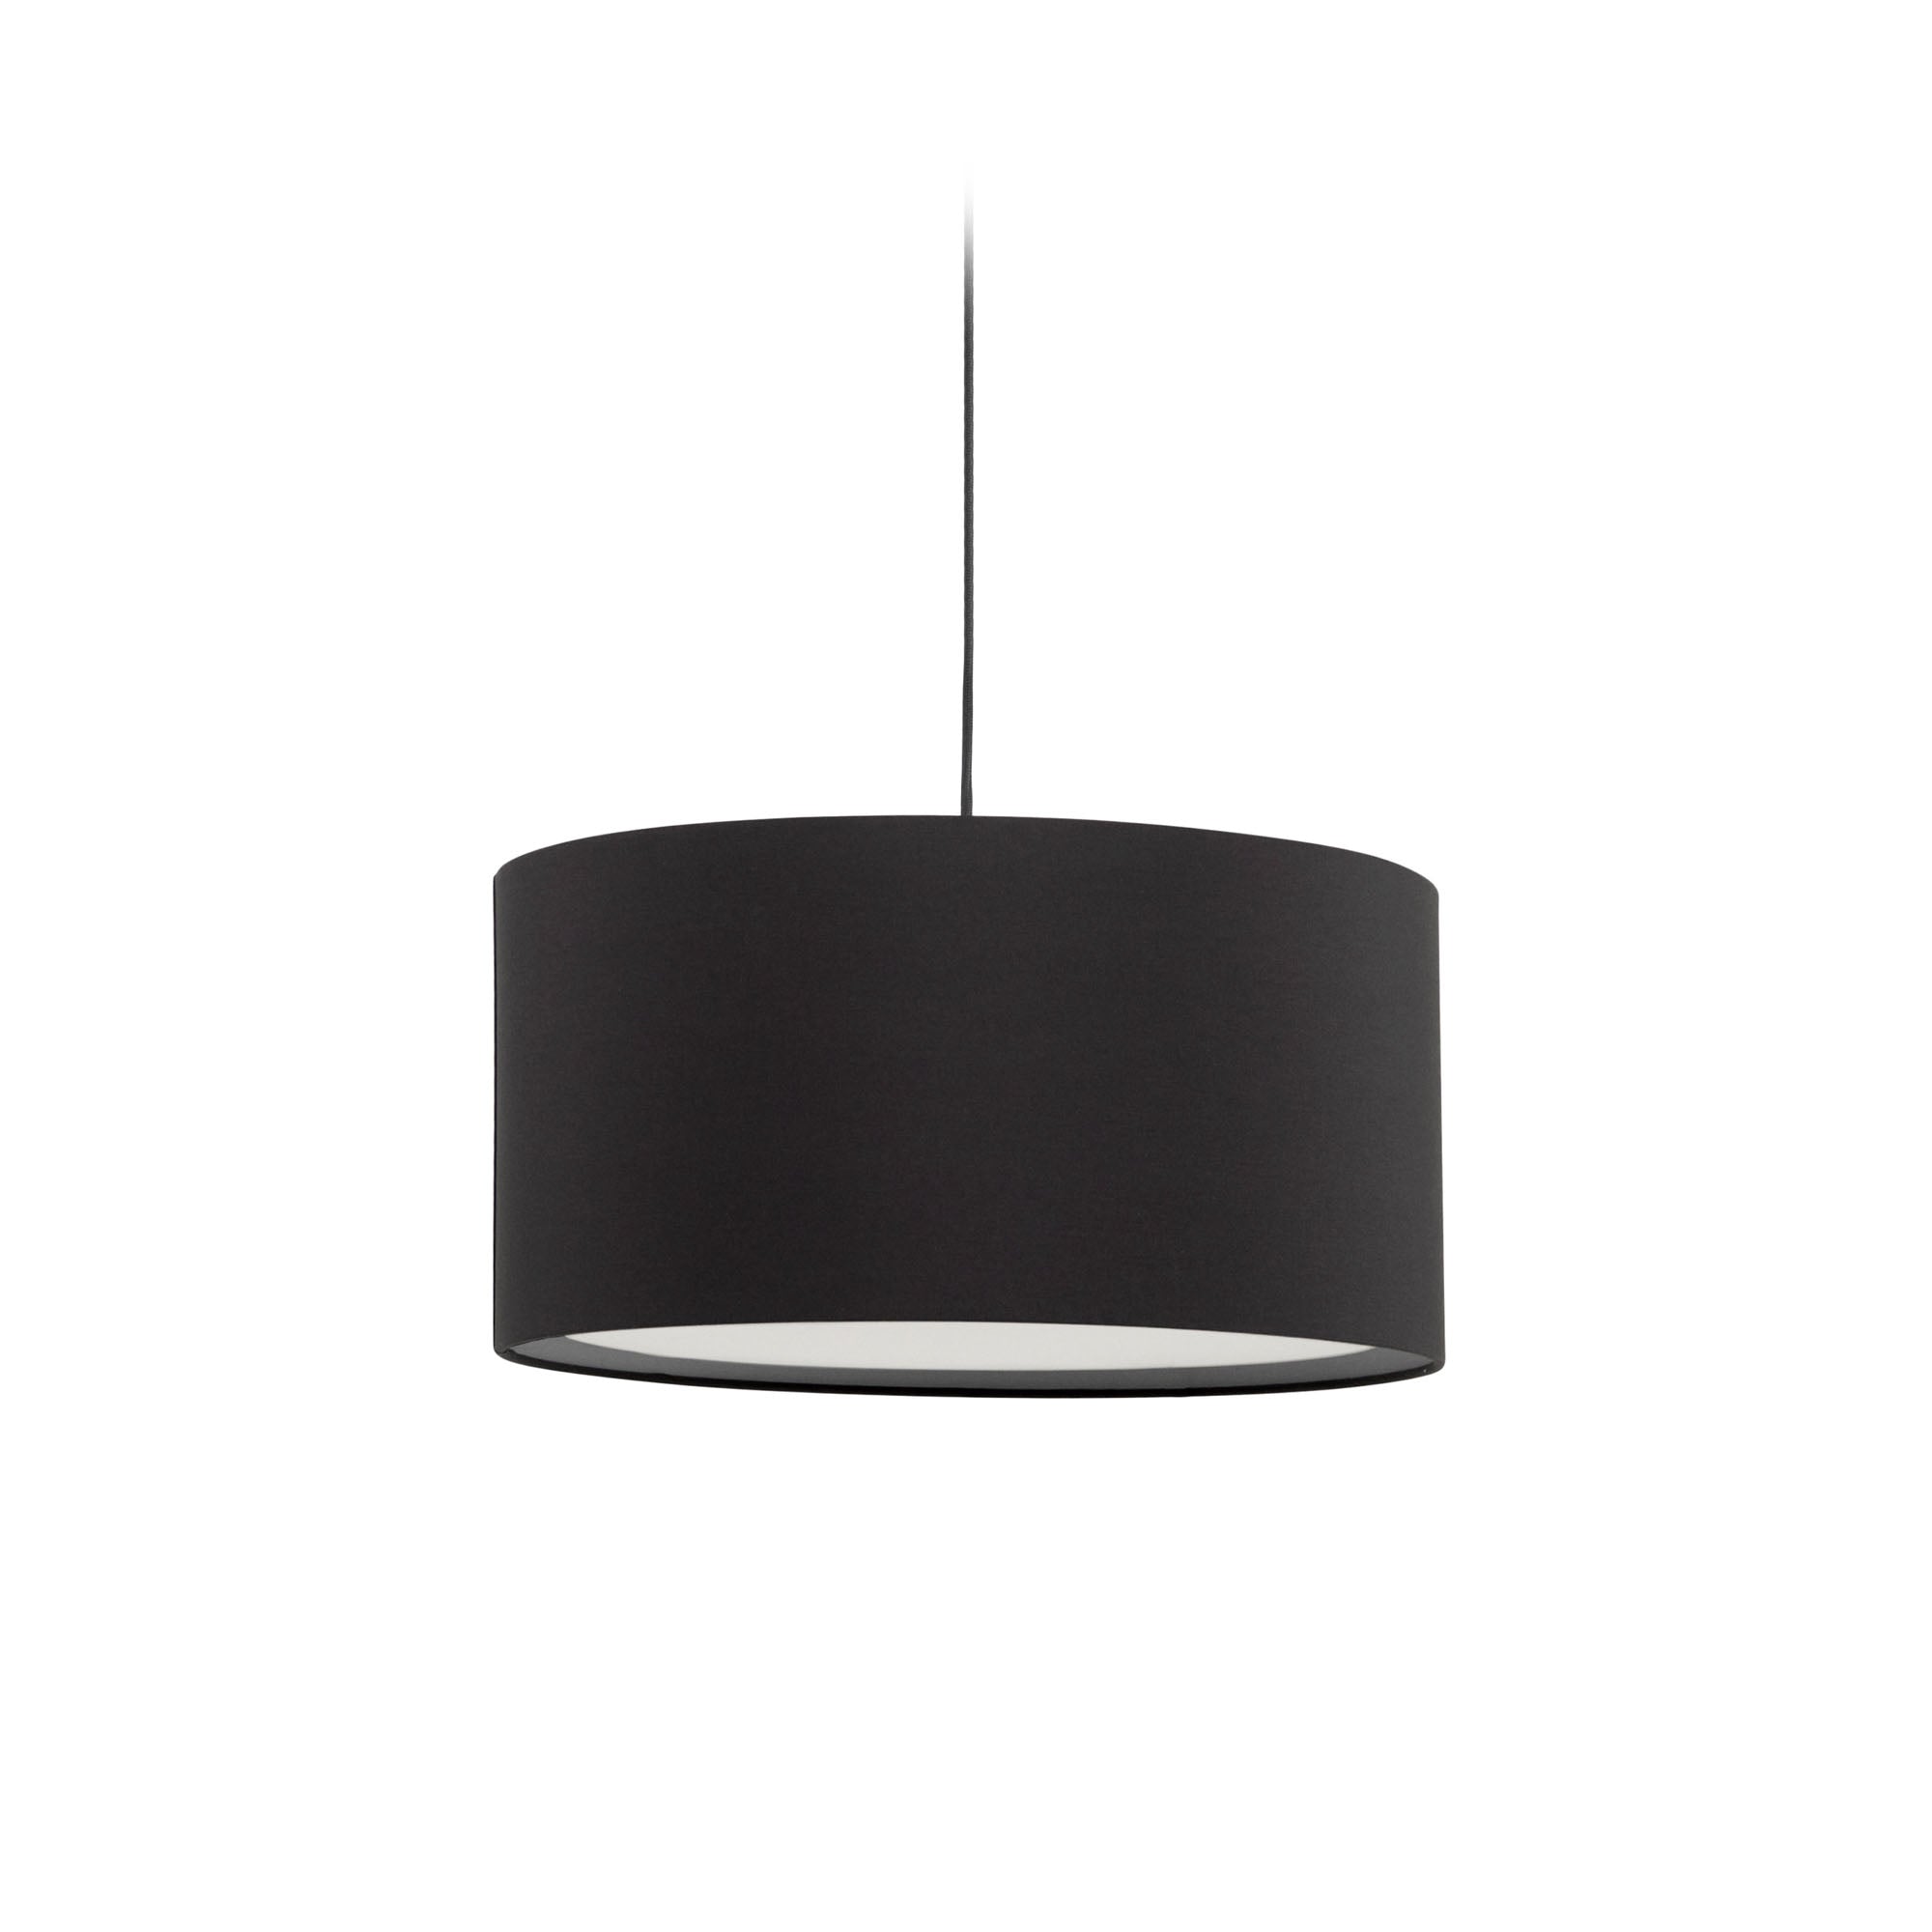 Santana ceiling lamp shade in black with white diffuser, Ø 40 cm